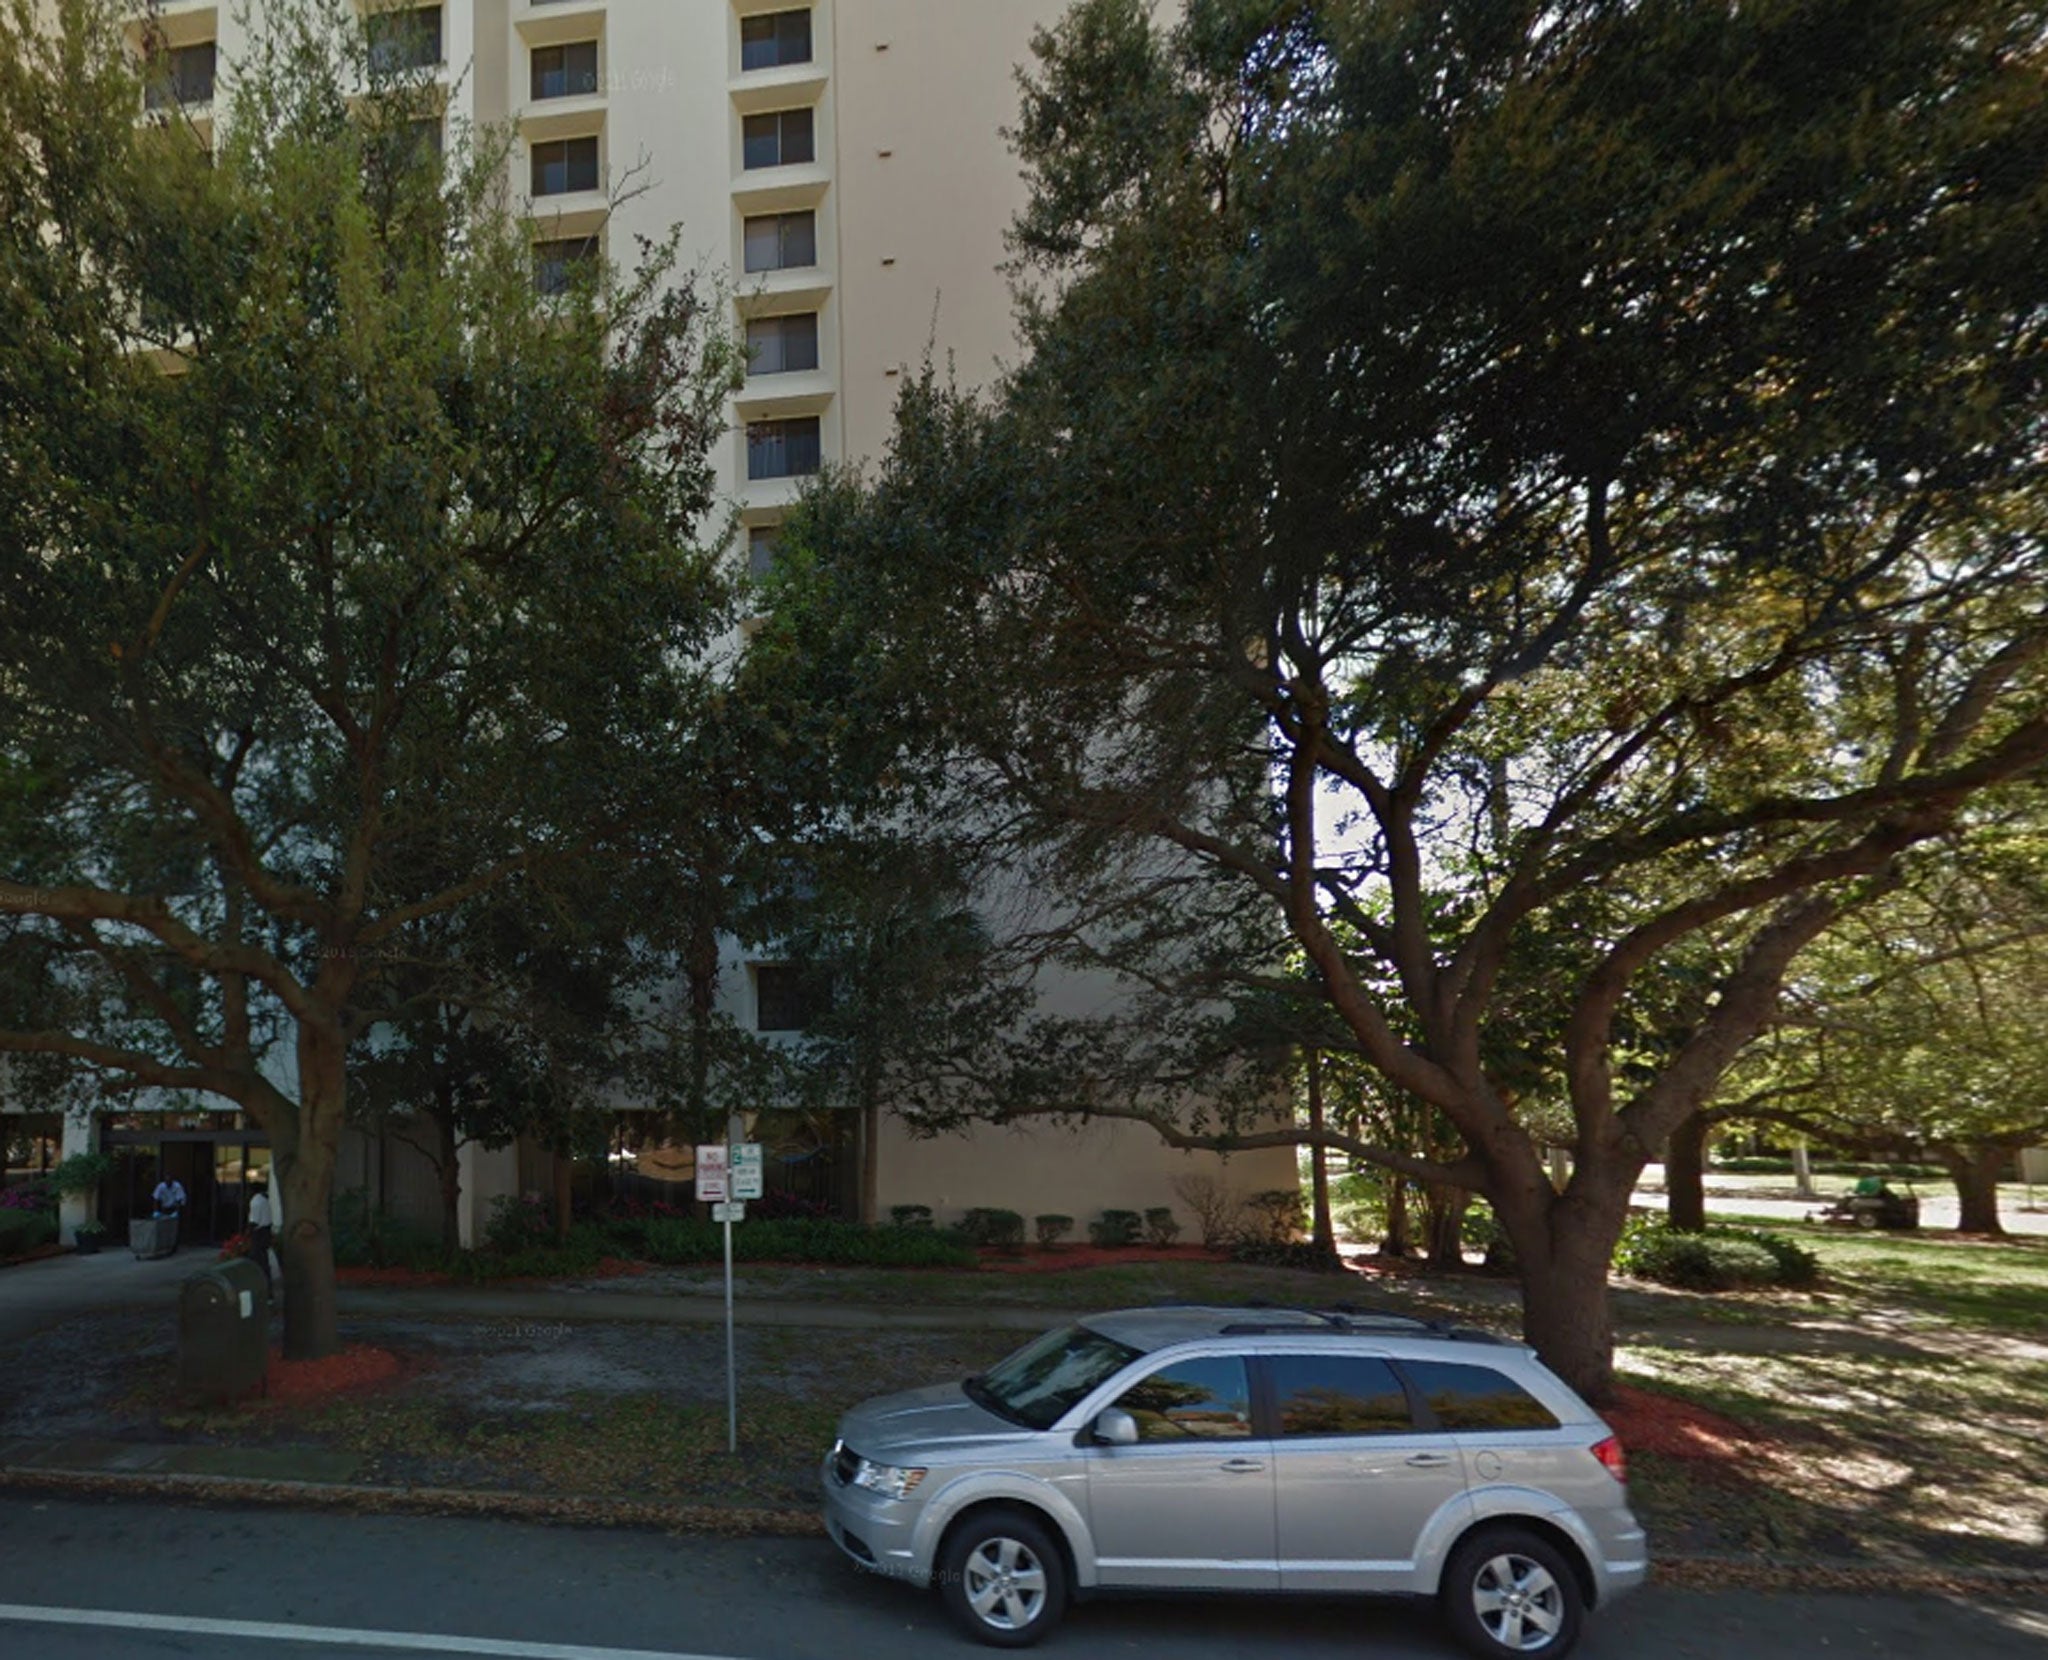 The woman jumped from the 16th floor of the Peterborough Apartments on 4th Avenue North, in Florida's St Petersburg